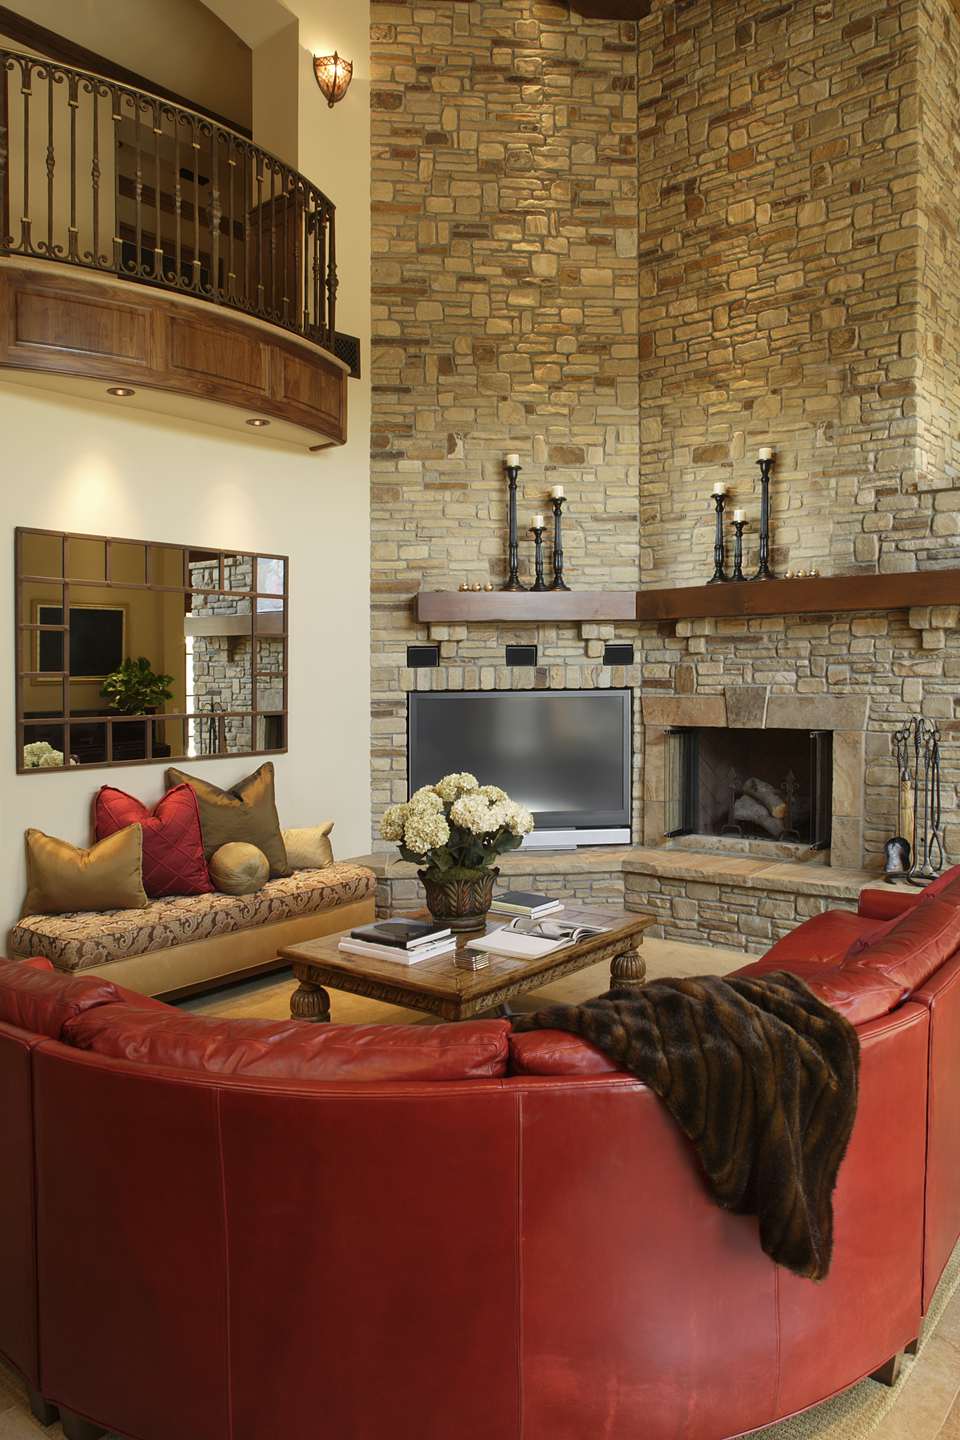 Cover Brick Fireplace with Stone New Manufactured Stone Veneer What to Know before You Buy